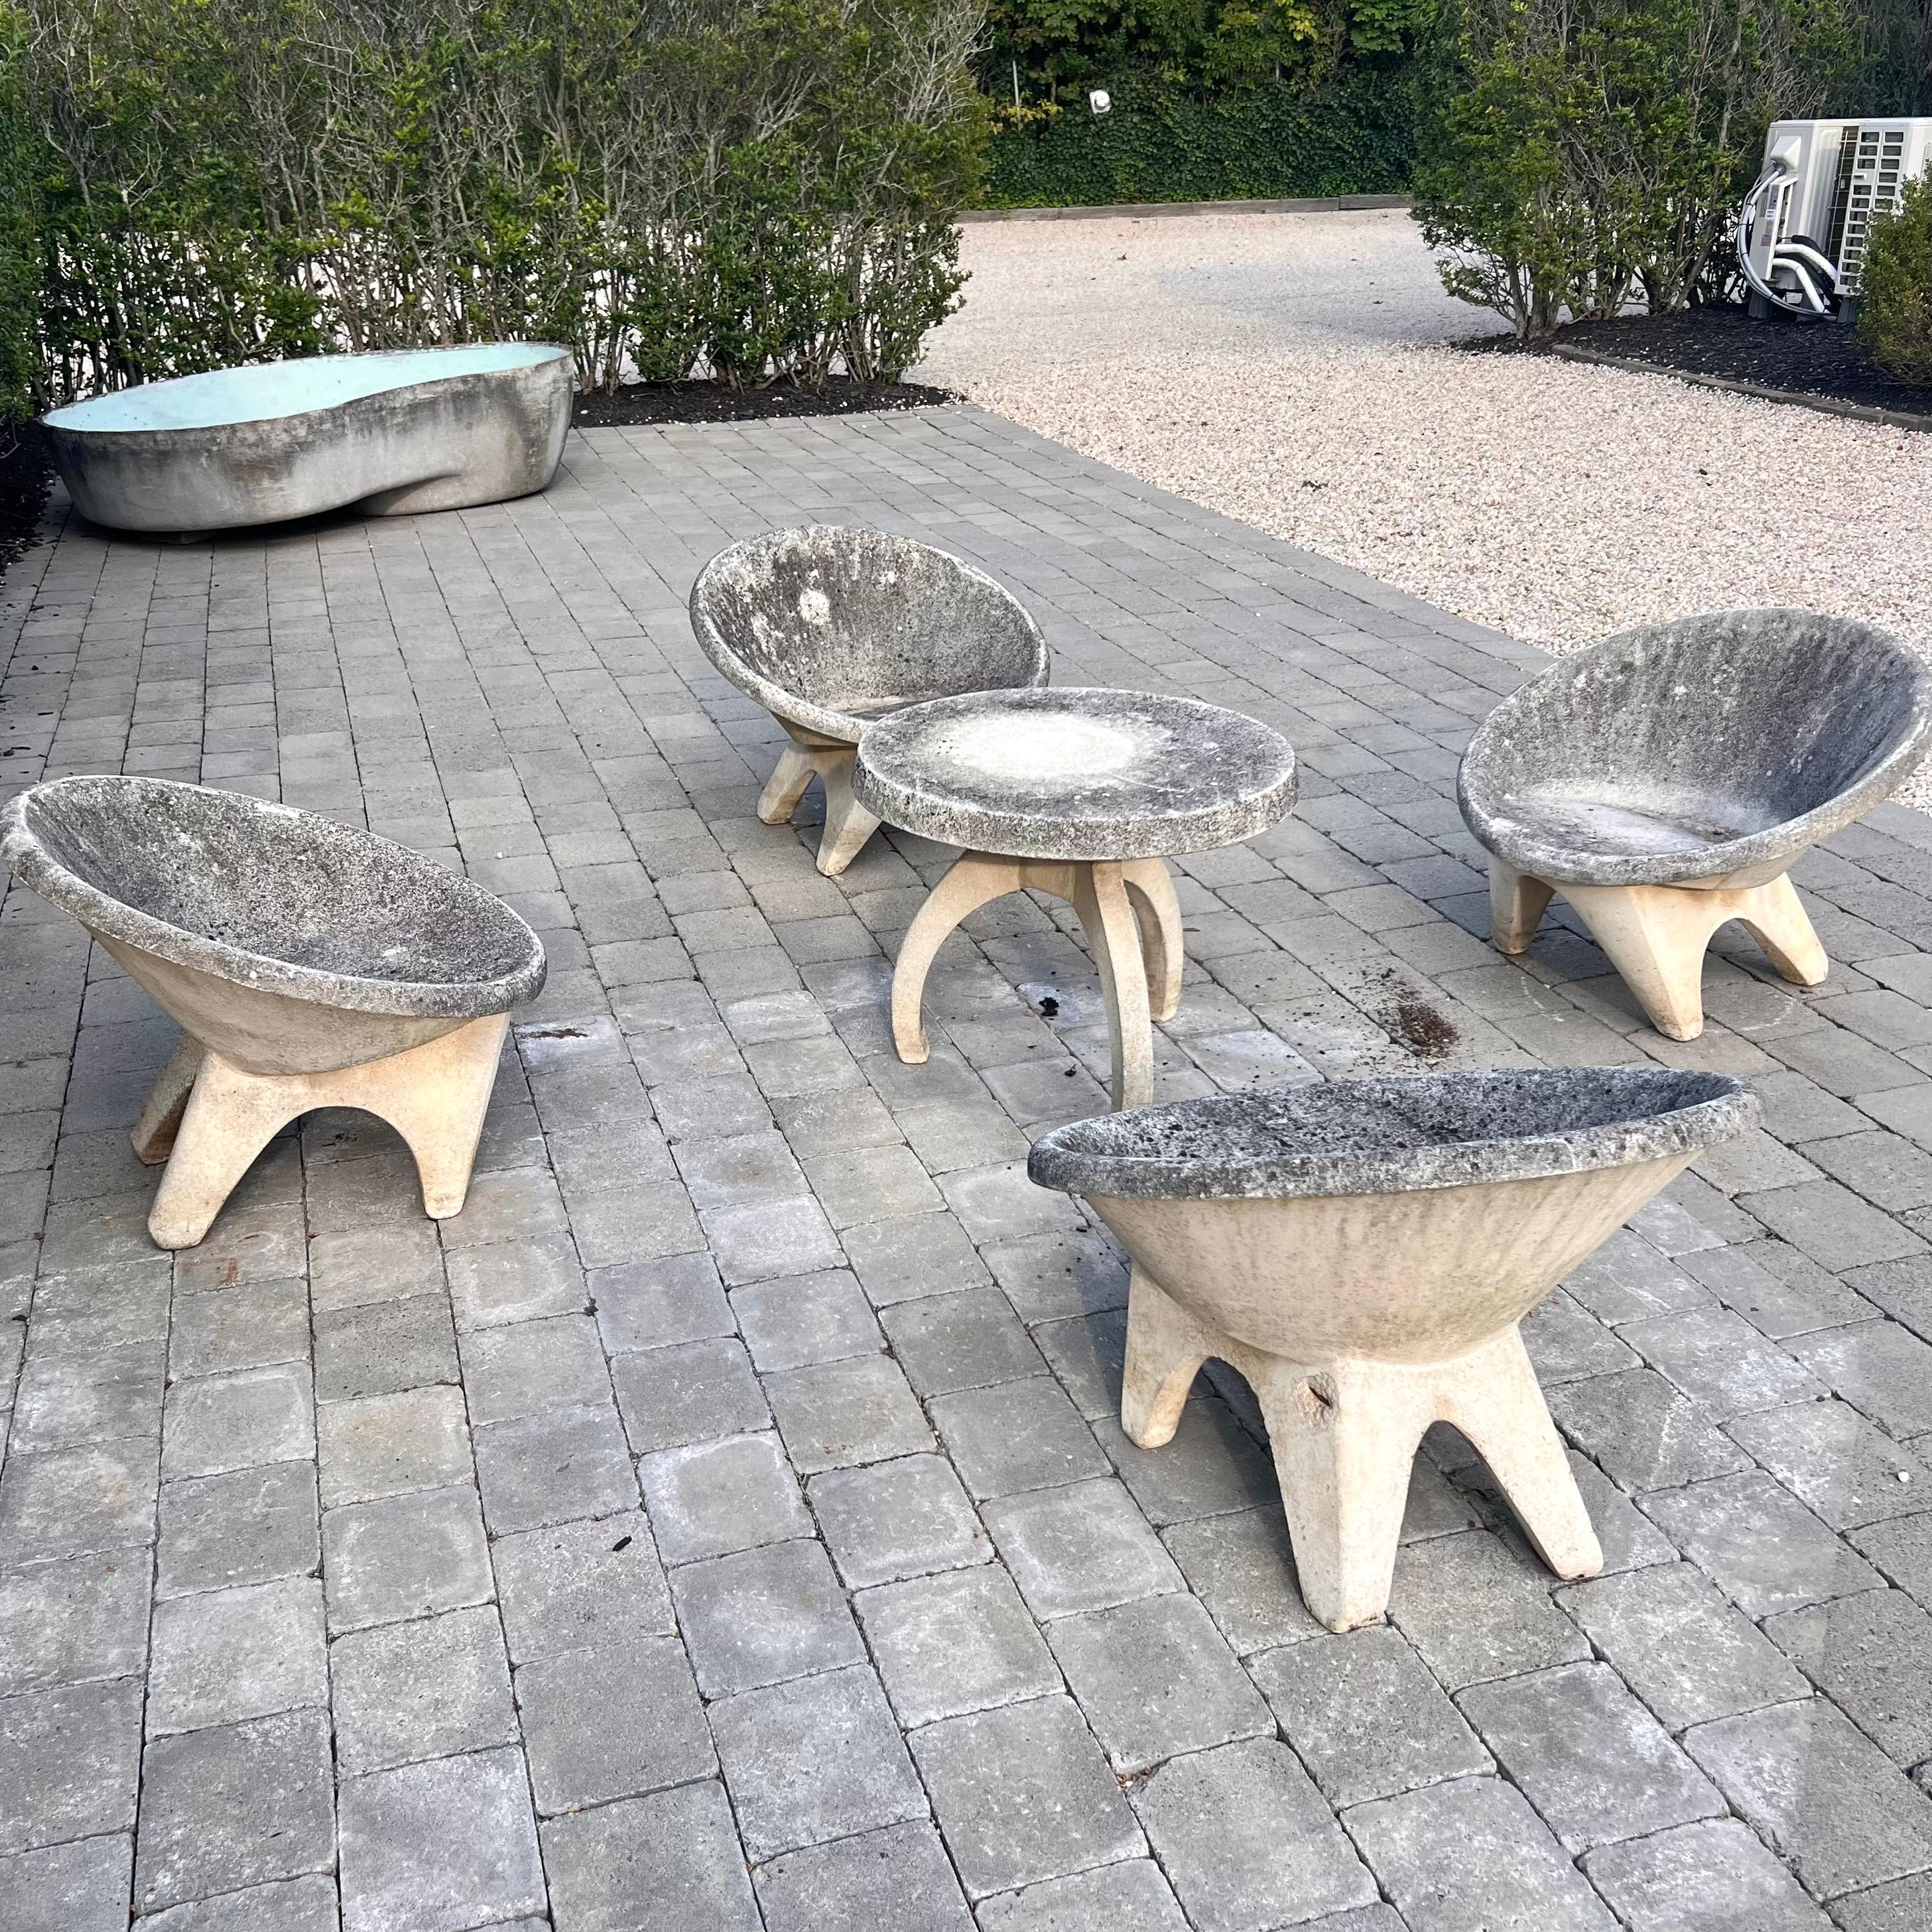 Belgian Set of 4 Sculptural Concrete Chairs and Table, 1960s Belgium For Sale